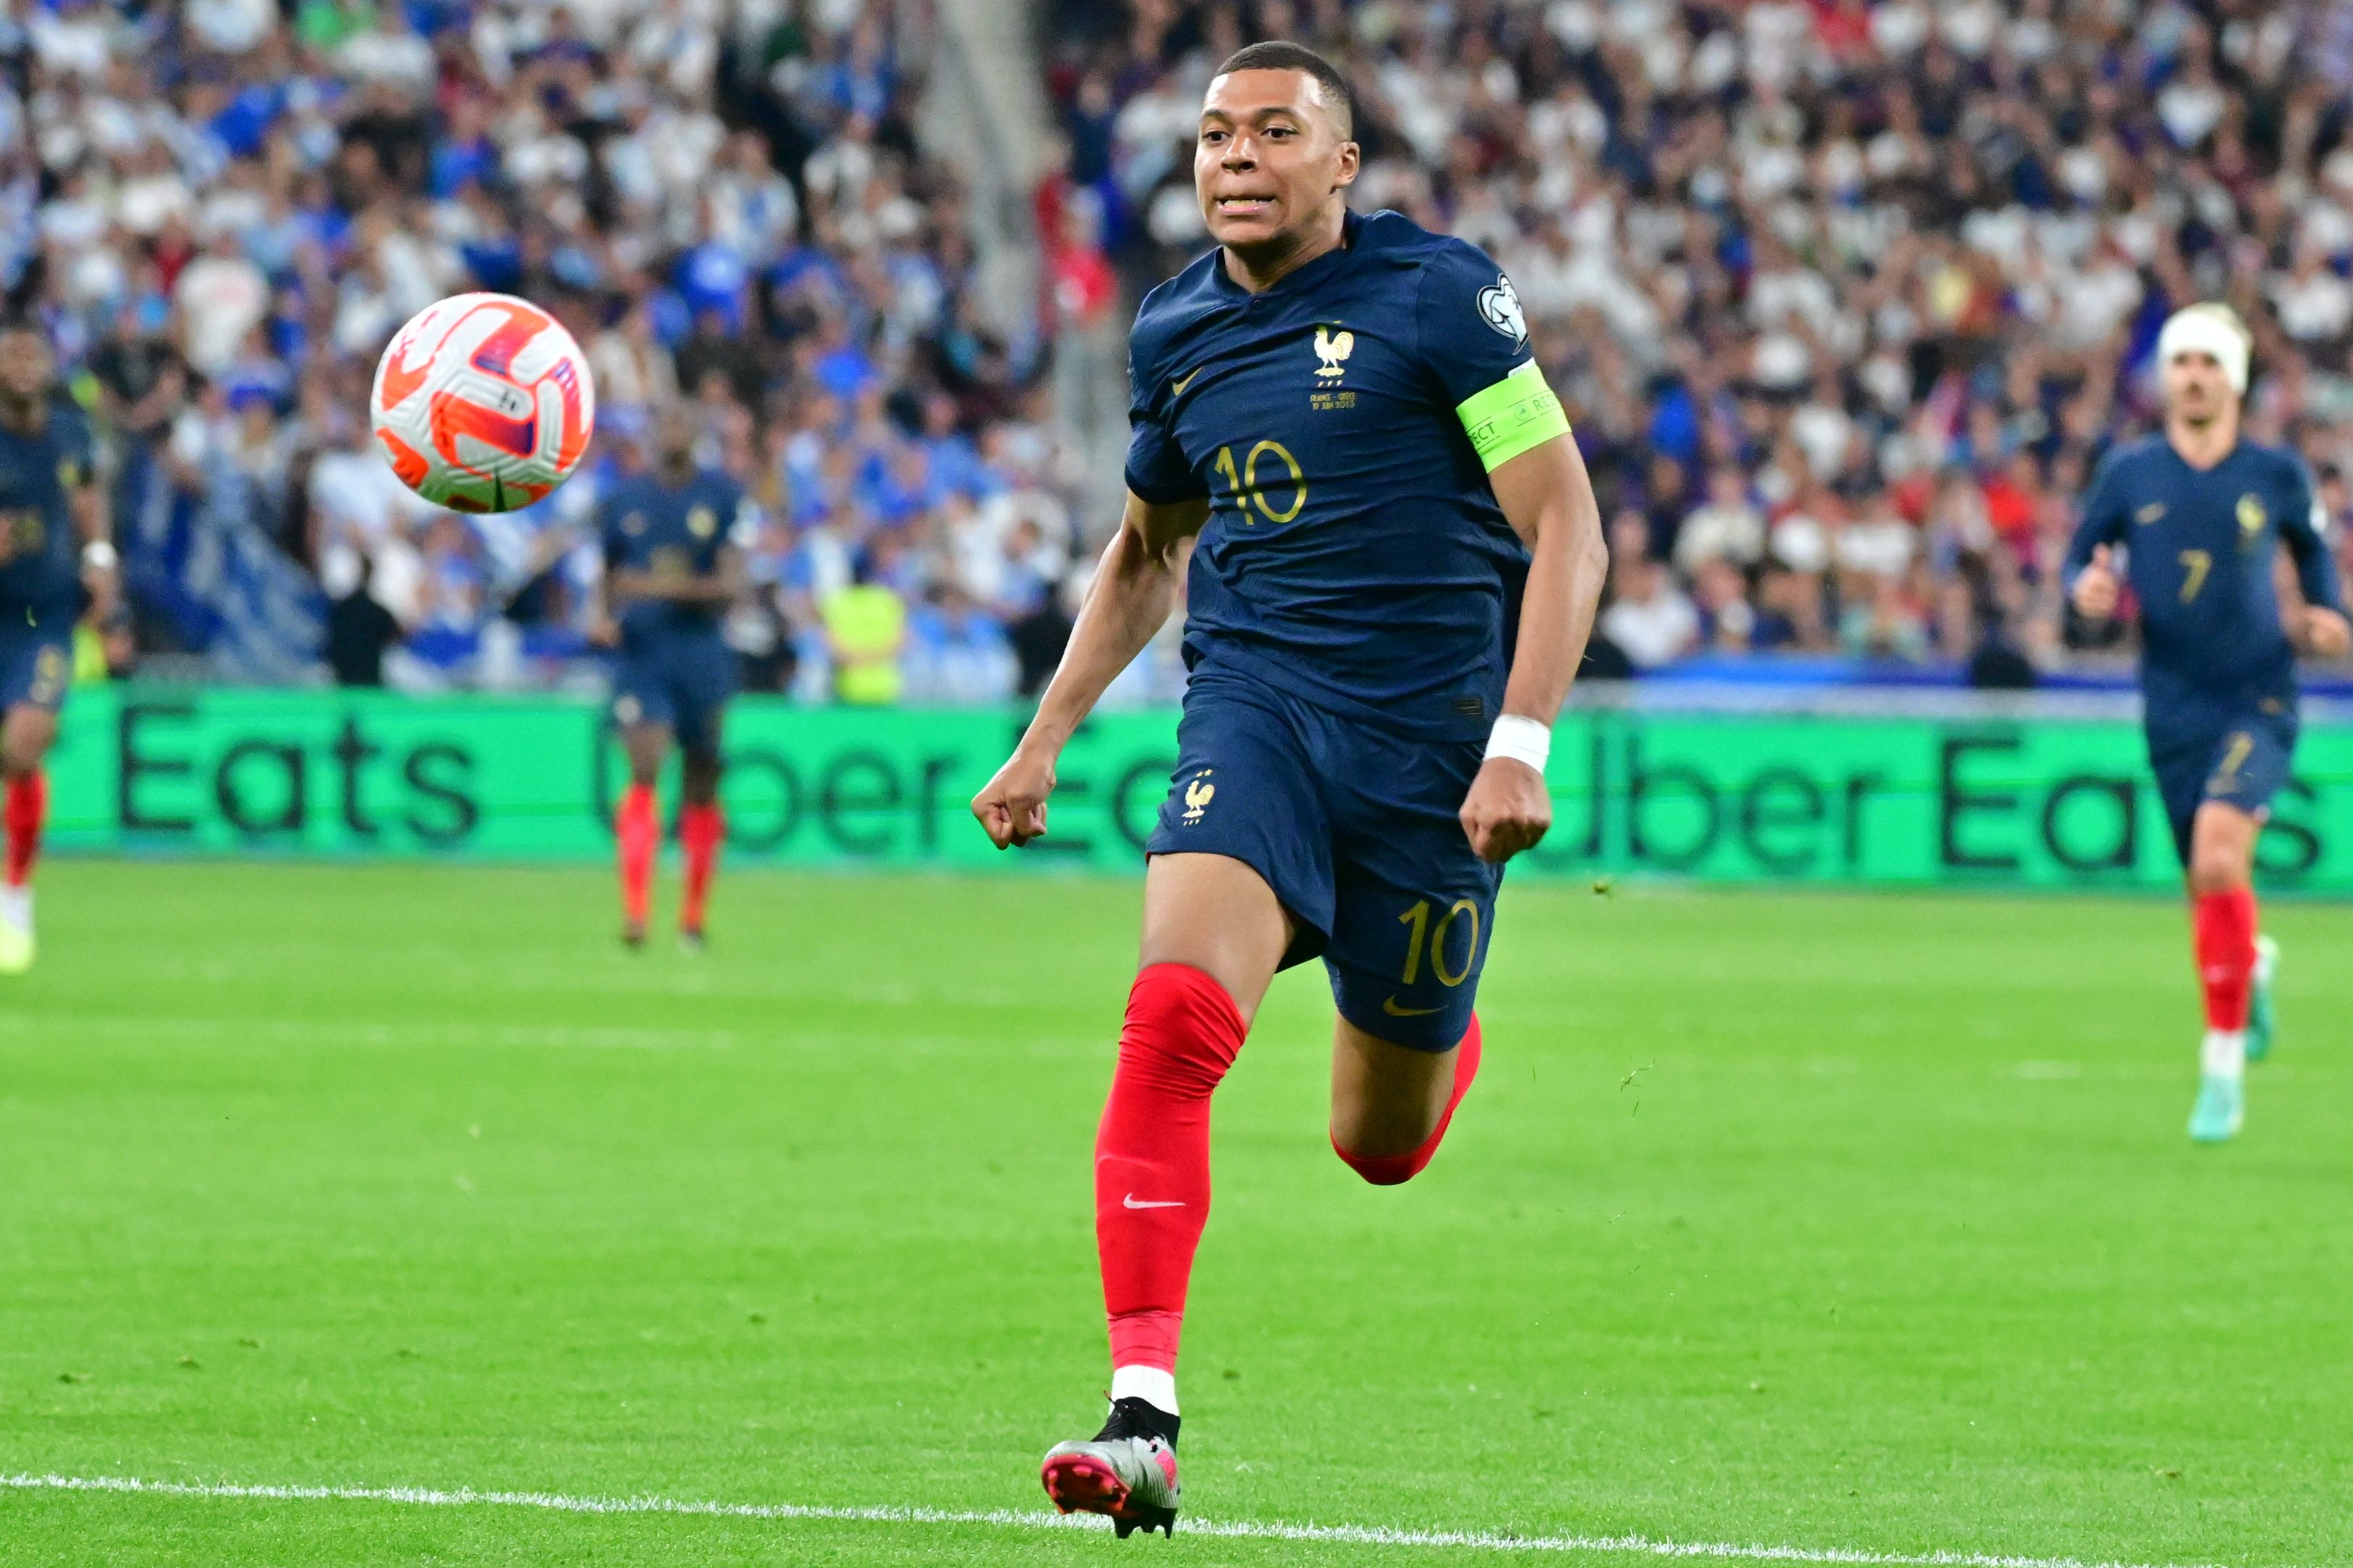 Kylian Mbappé of France goes for the ball during a match against Greece.